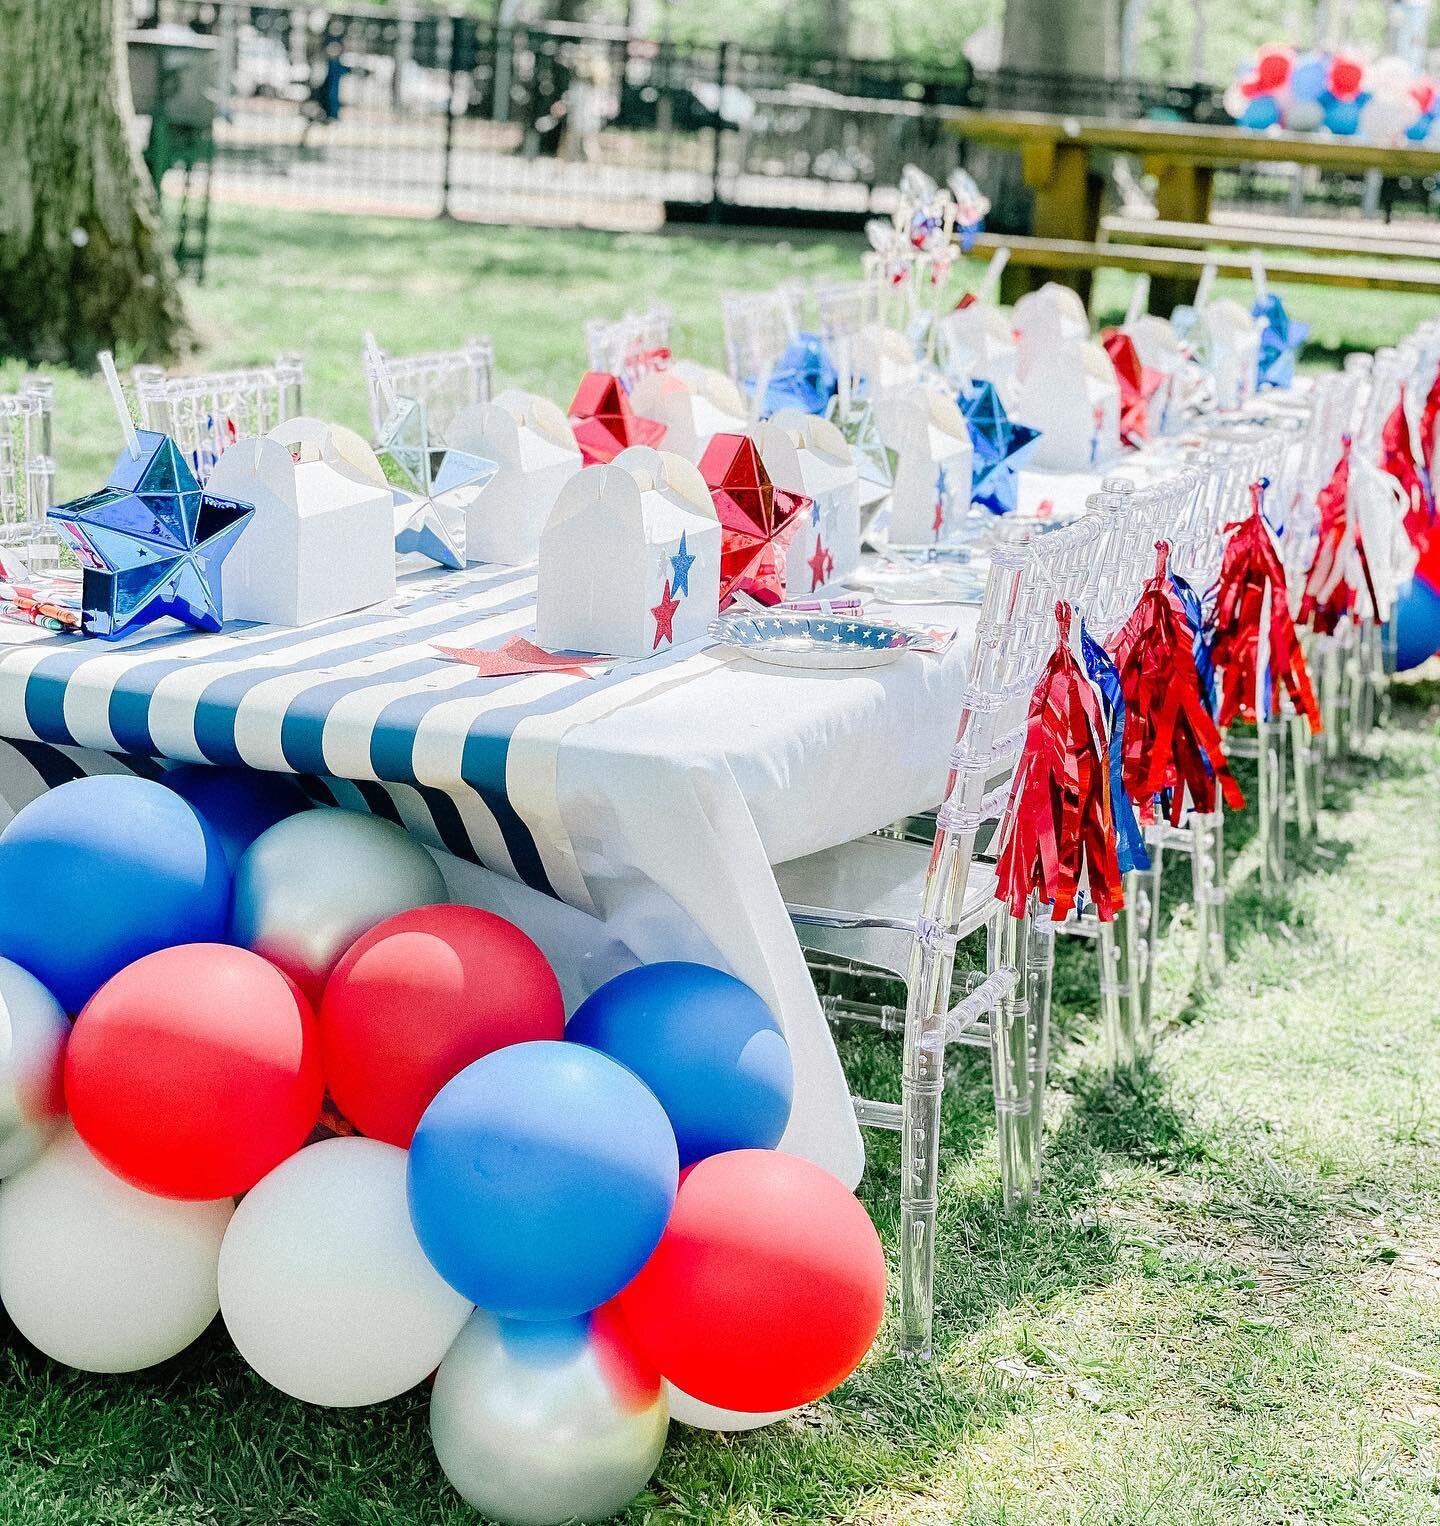 Memorial Day weekend is in less than 3 weeks! 
The kick-off to summer 🇺🇸
Love this patriotic table + I know it&rsquo;ll dress up any BBQ!